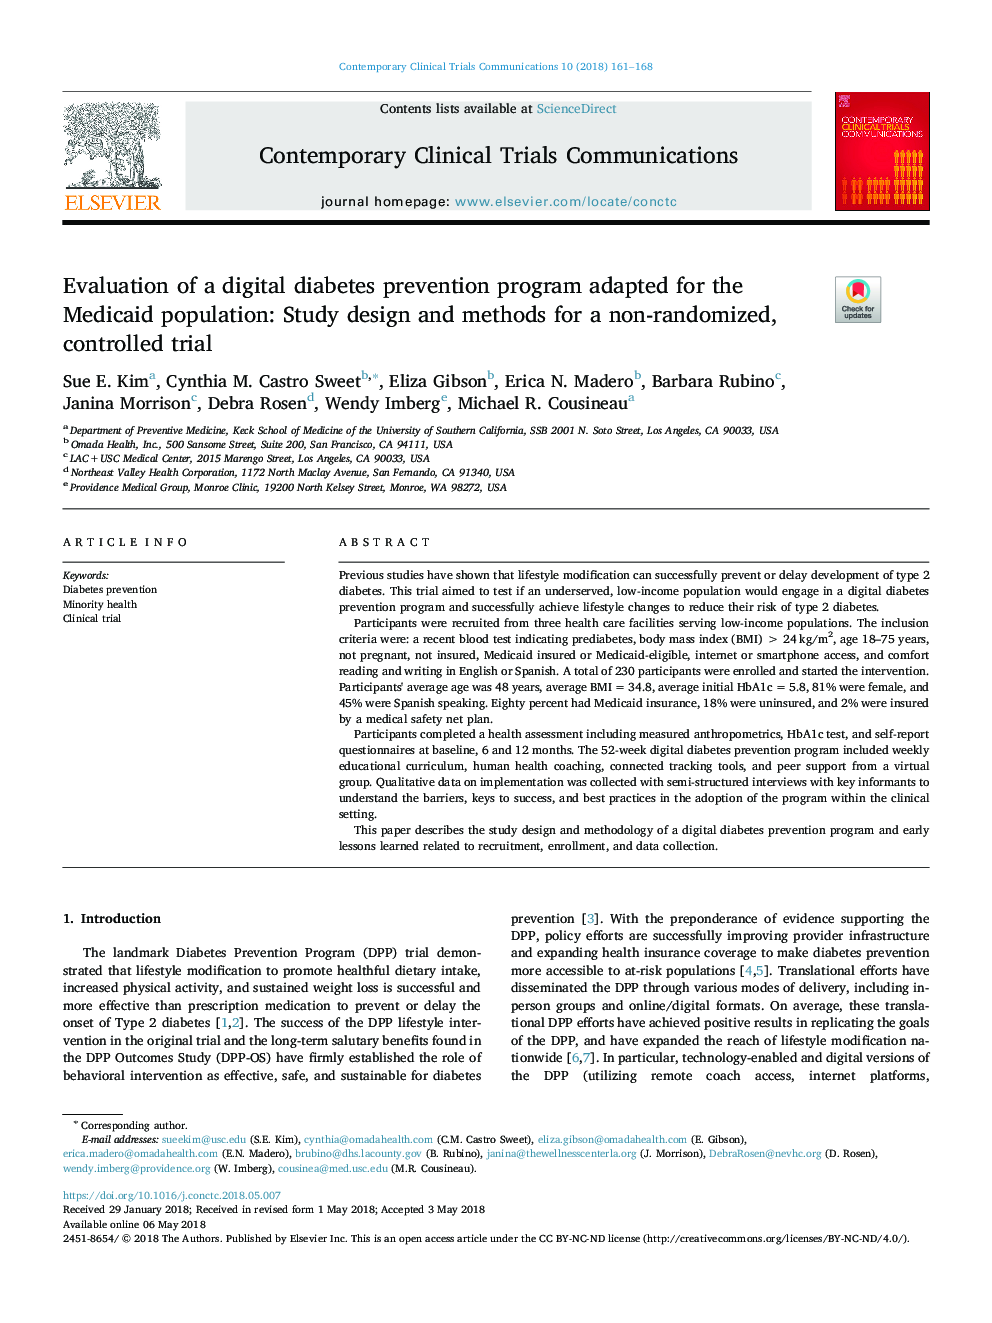 Evaluation of a digital diabetes prevention program adapted for the Medicaid population: Study design and methods for a non-randomized, controlled trial